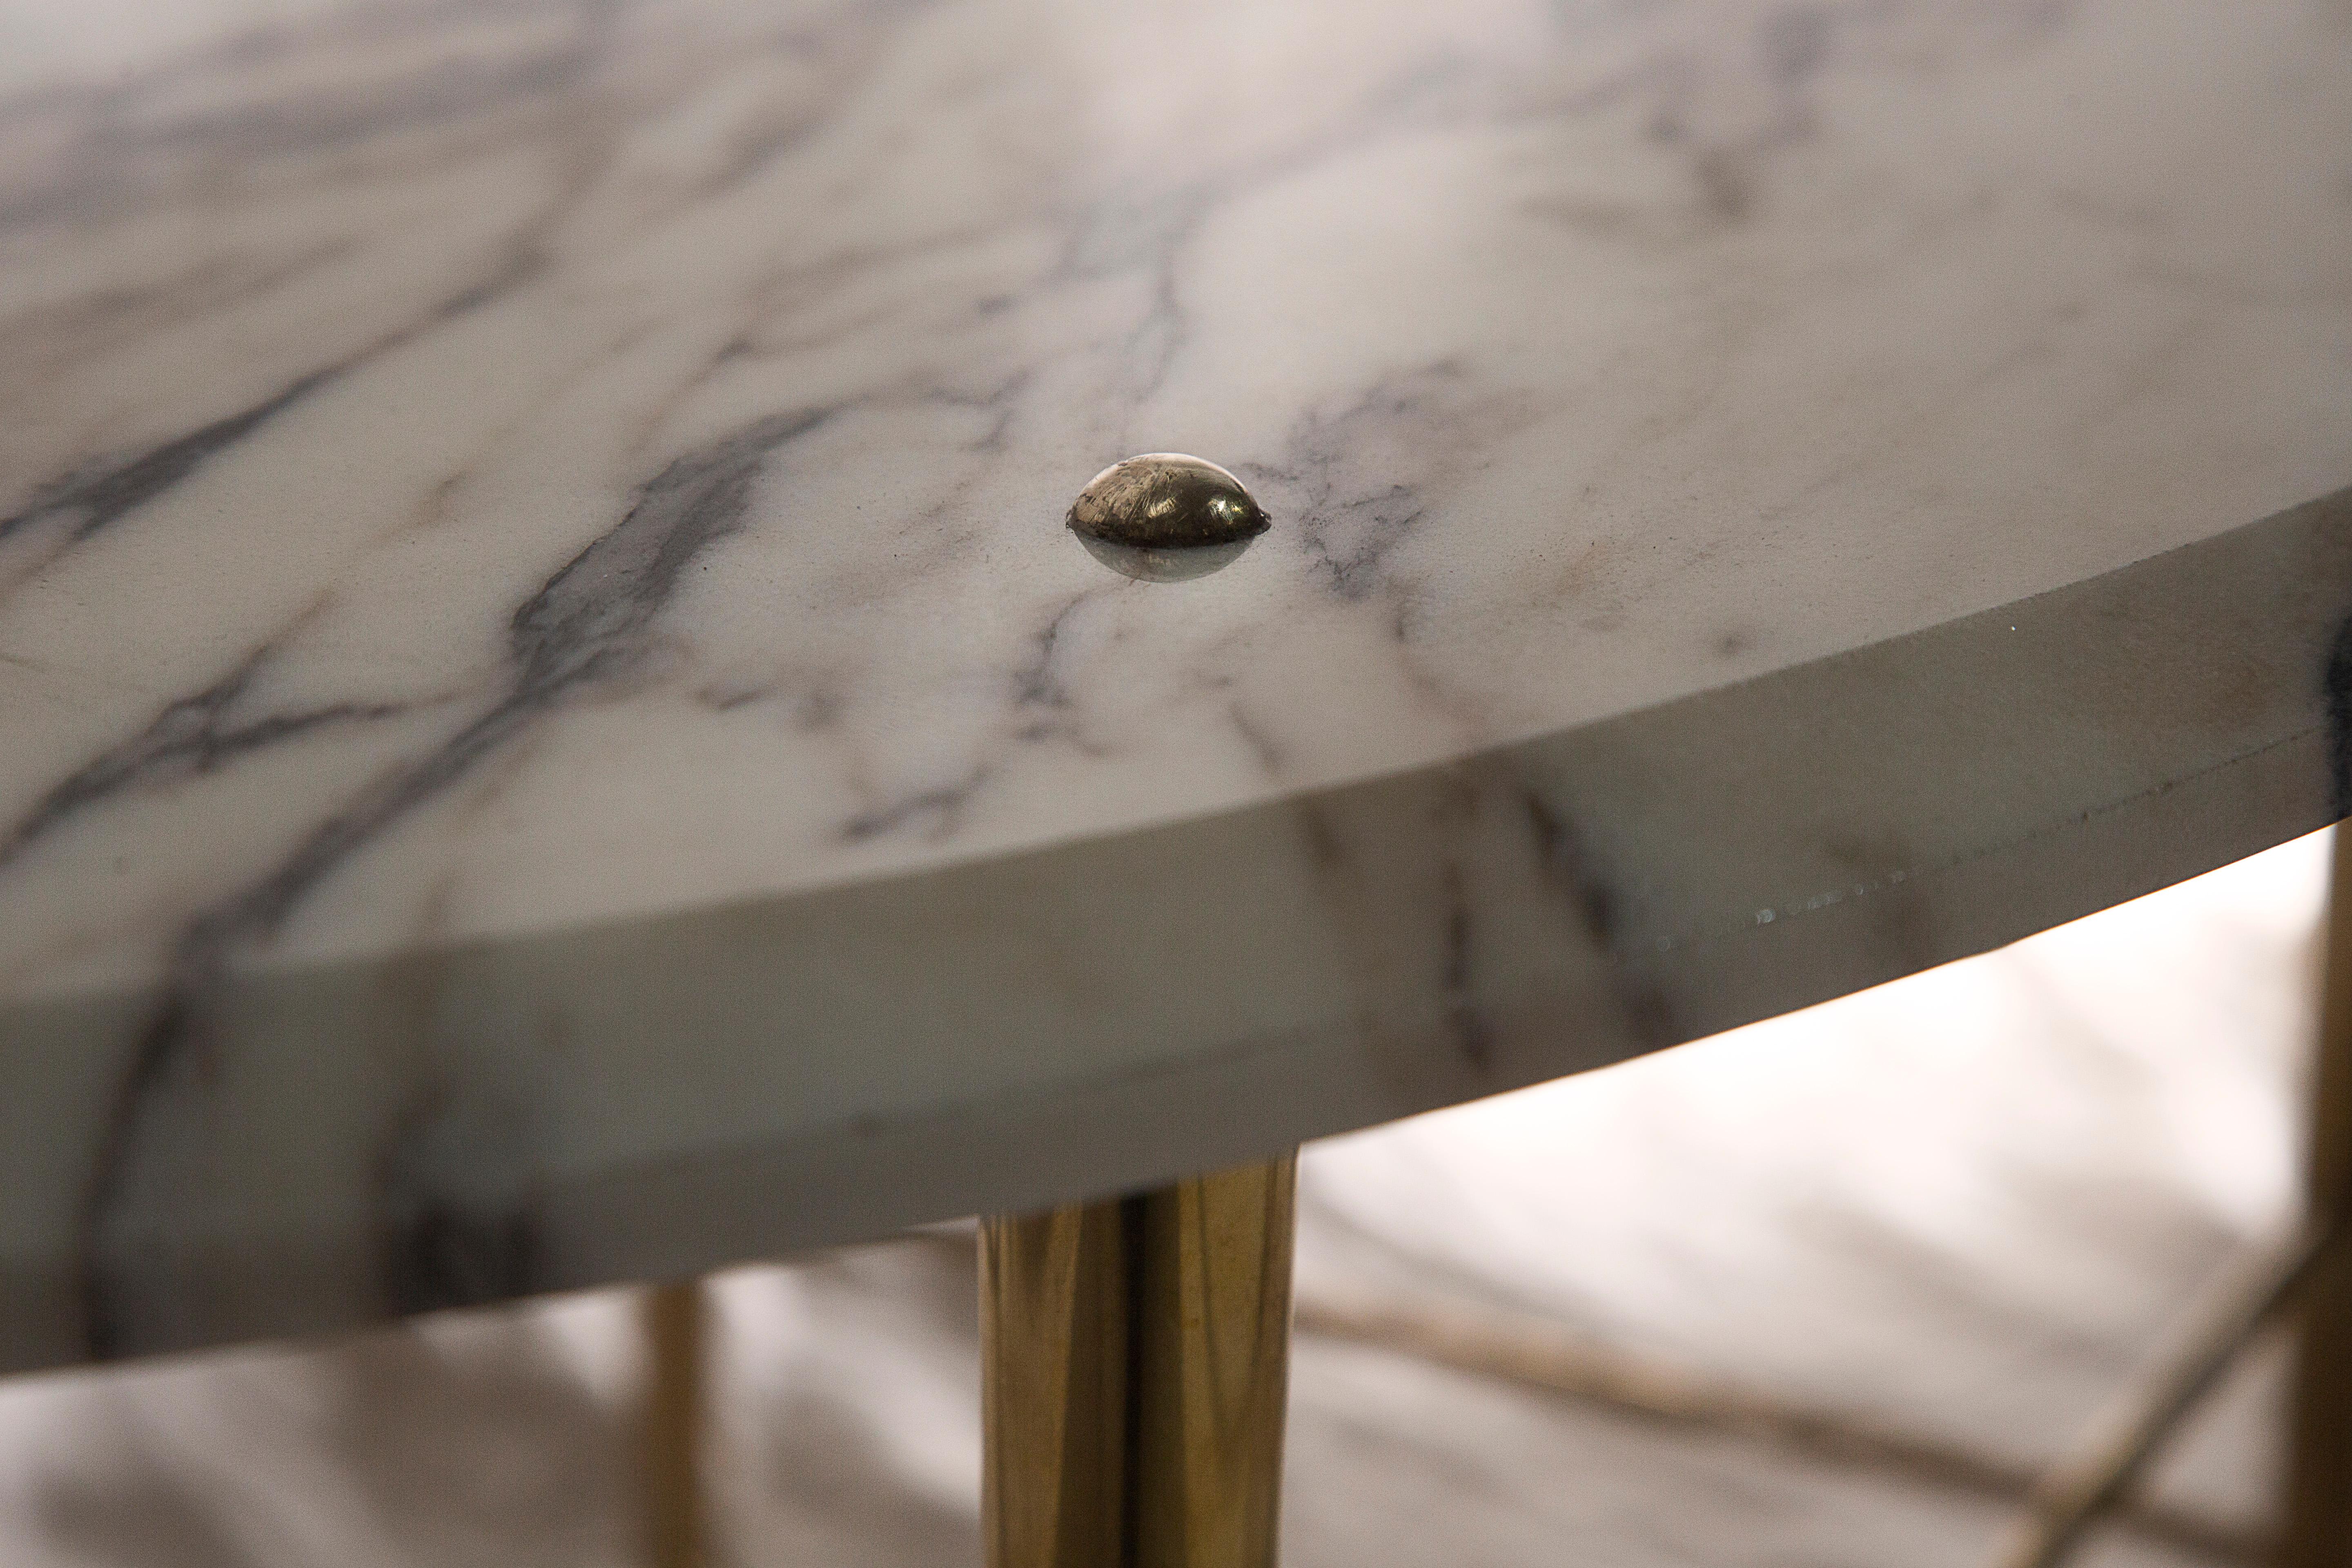 Stud Coffee Table in Vulcanatta Marble and Polished Brass — Medium In New Condition For Sale In London, GB